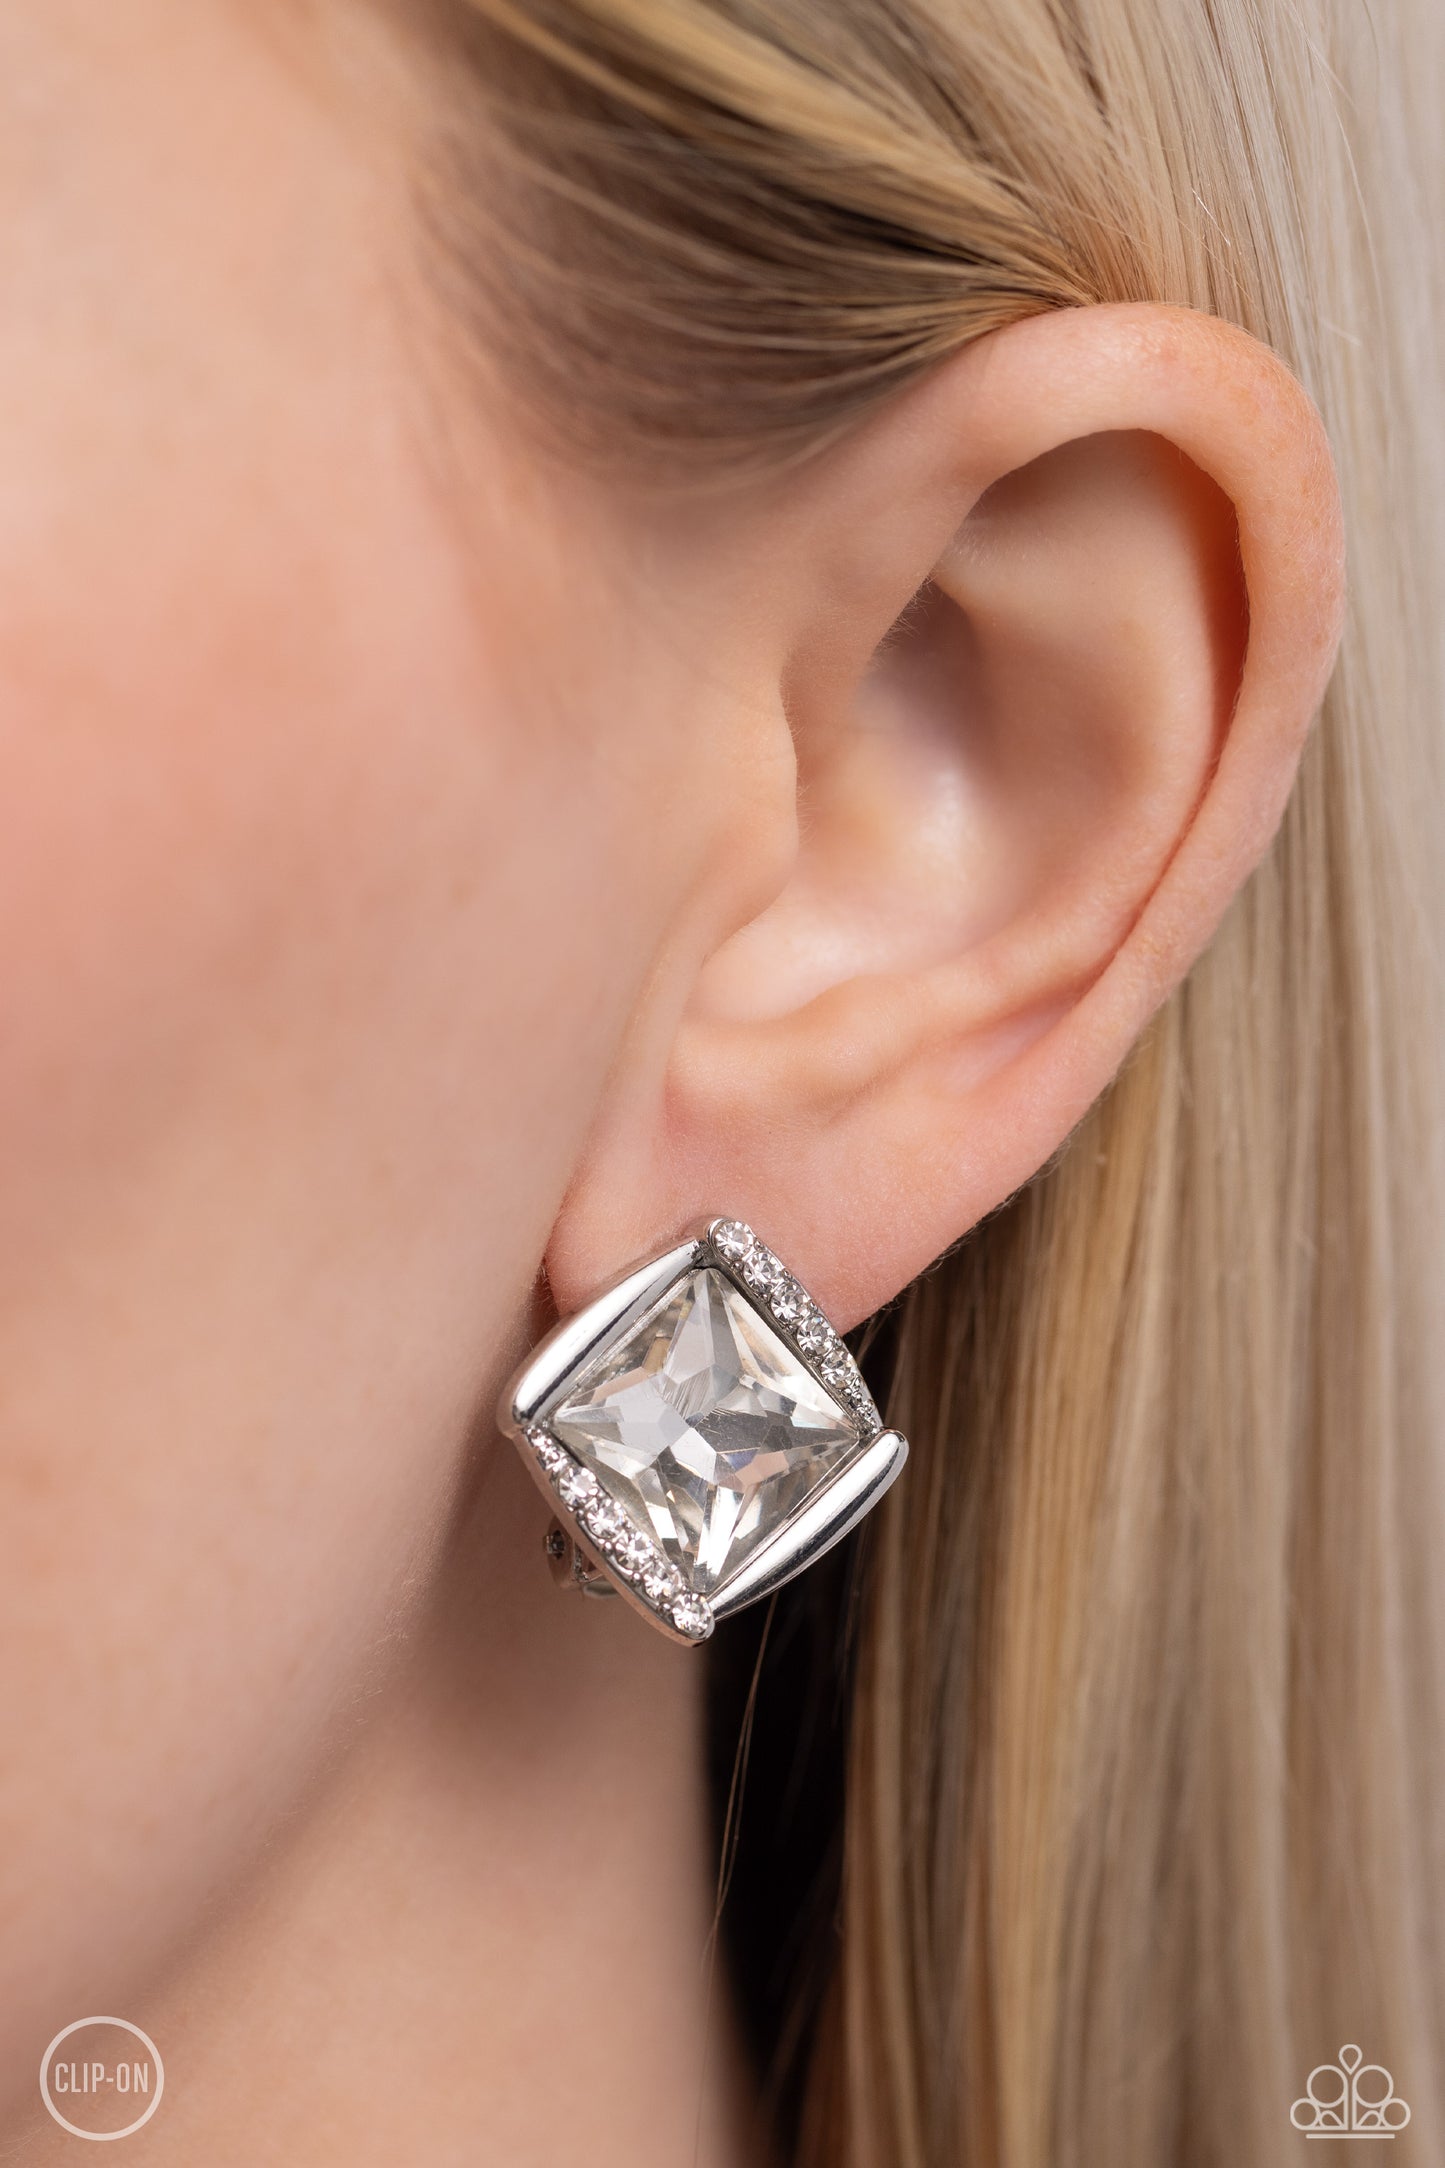 Sparkle Squared White Rhinestone Clip-On Earring - Paparazzi Accessories  Shiny silver bars gently overlap with white rhinestone encrusted silver bars around a square cut white rhinestone, resulting in a refined radiance. Earring attaches to a standard clip-on fitting.  Sold as one pair of clip-on earrings.  P5CO-WTXX-136XX